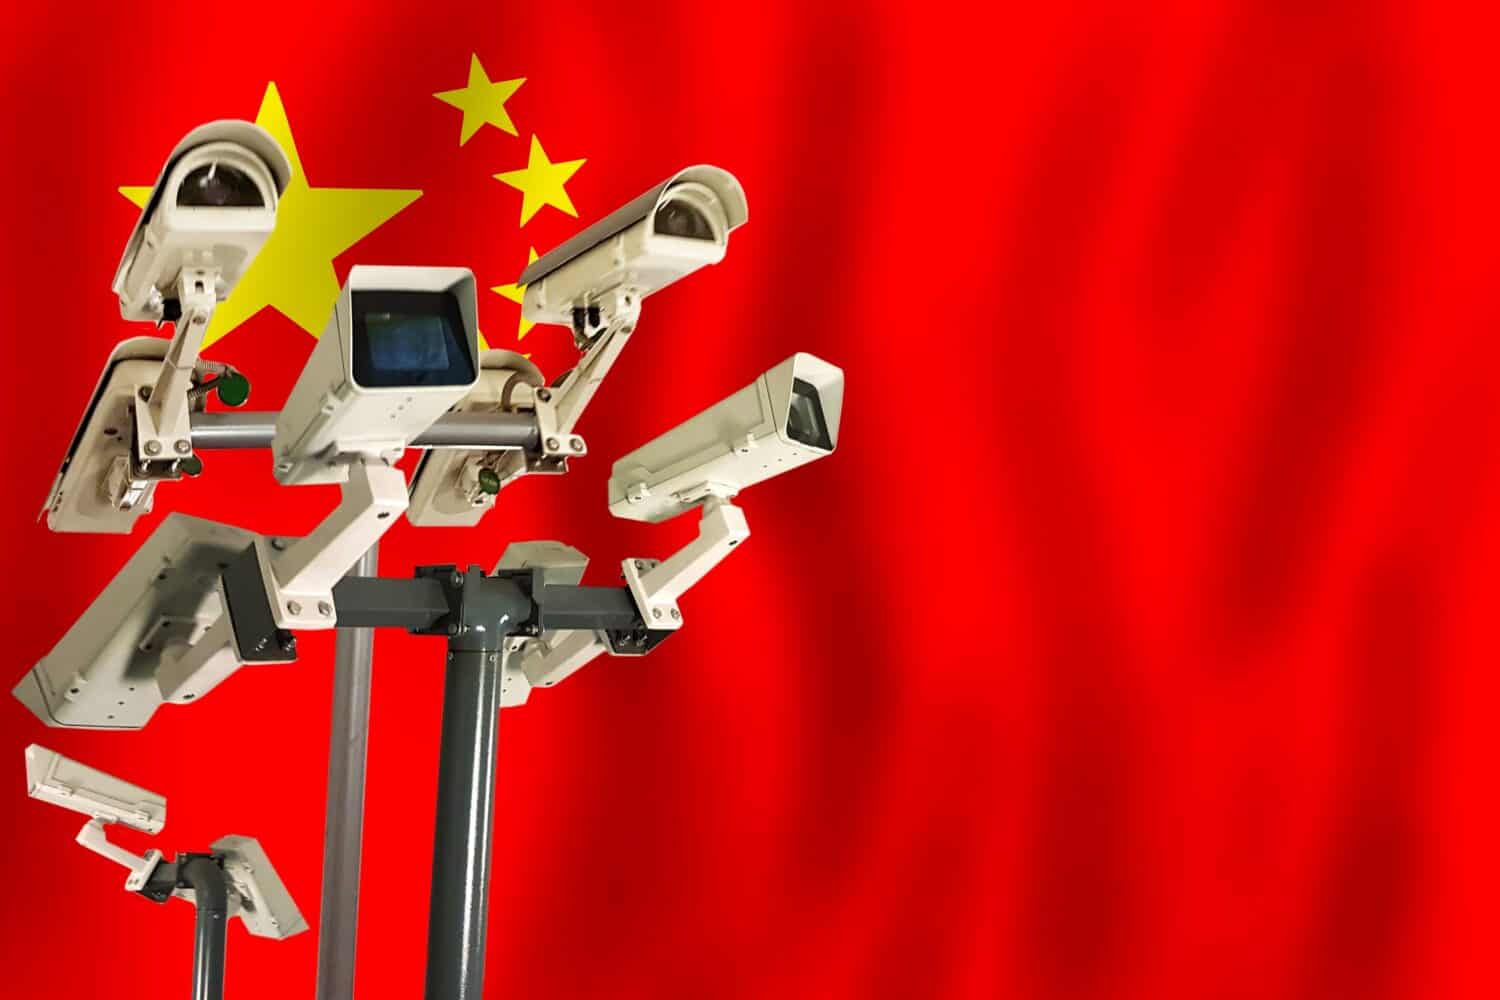 Chinese CCTV camera on the flag of China Surveillance, security, control and totalitarianism concept